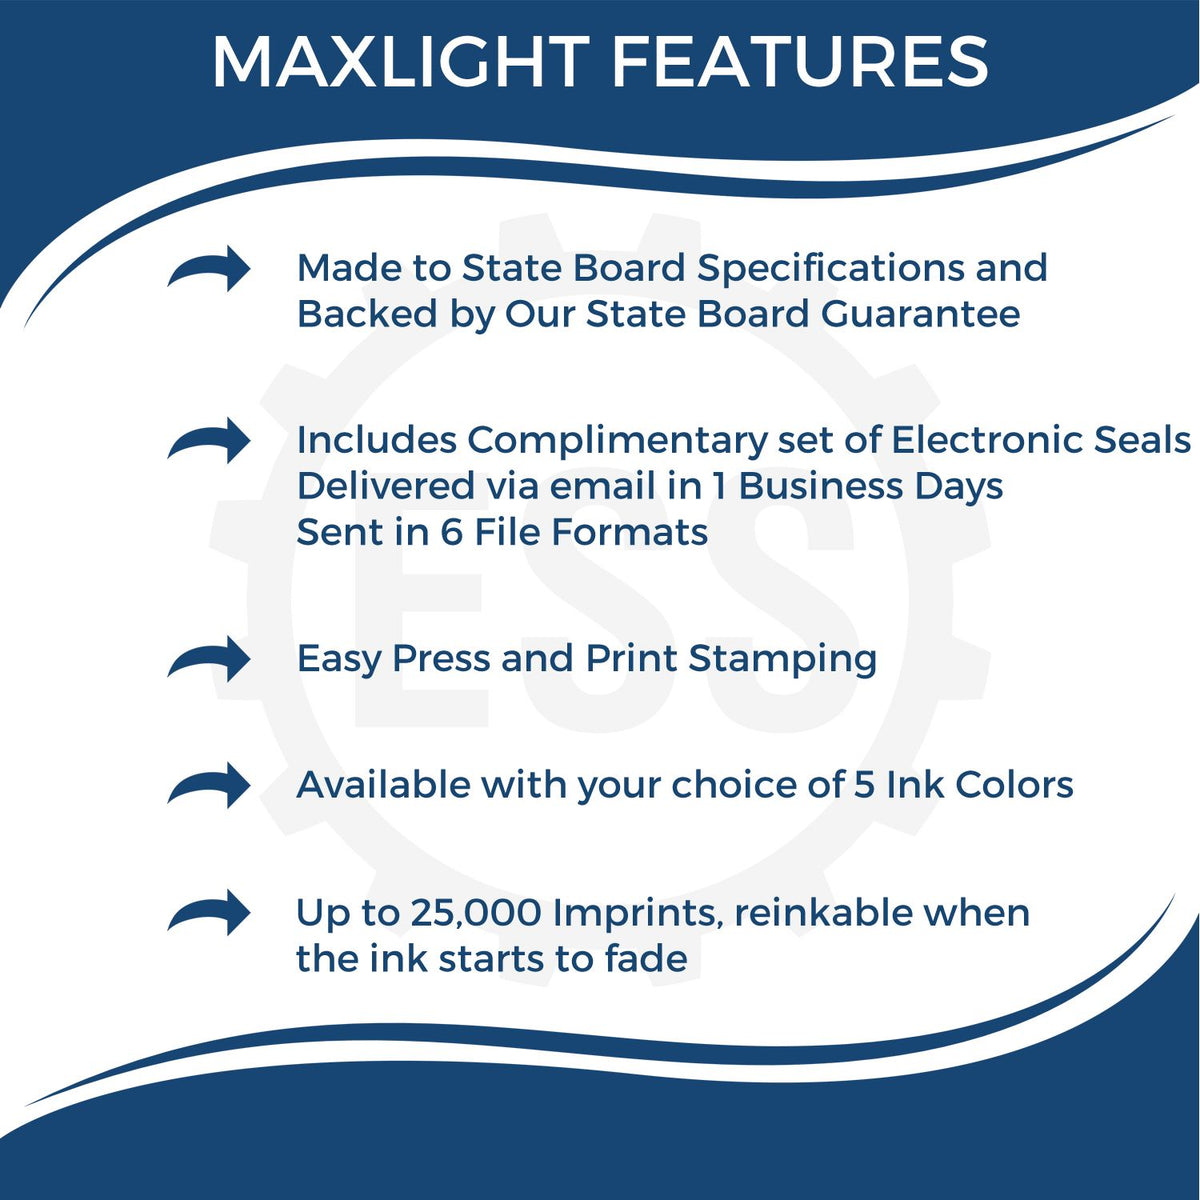 A picture of an infographic highlighting the selling points for the MaxLight Premium Pre-Inked Minnesota State Seal Notarial Stamp